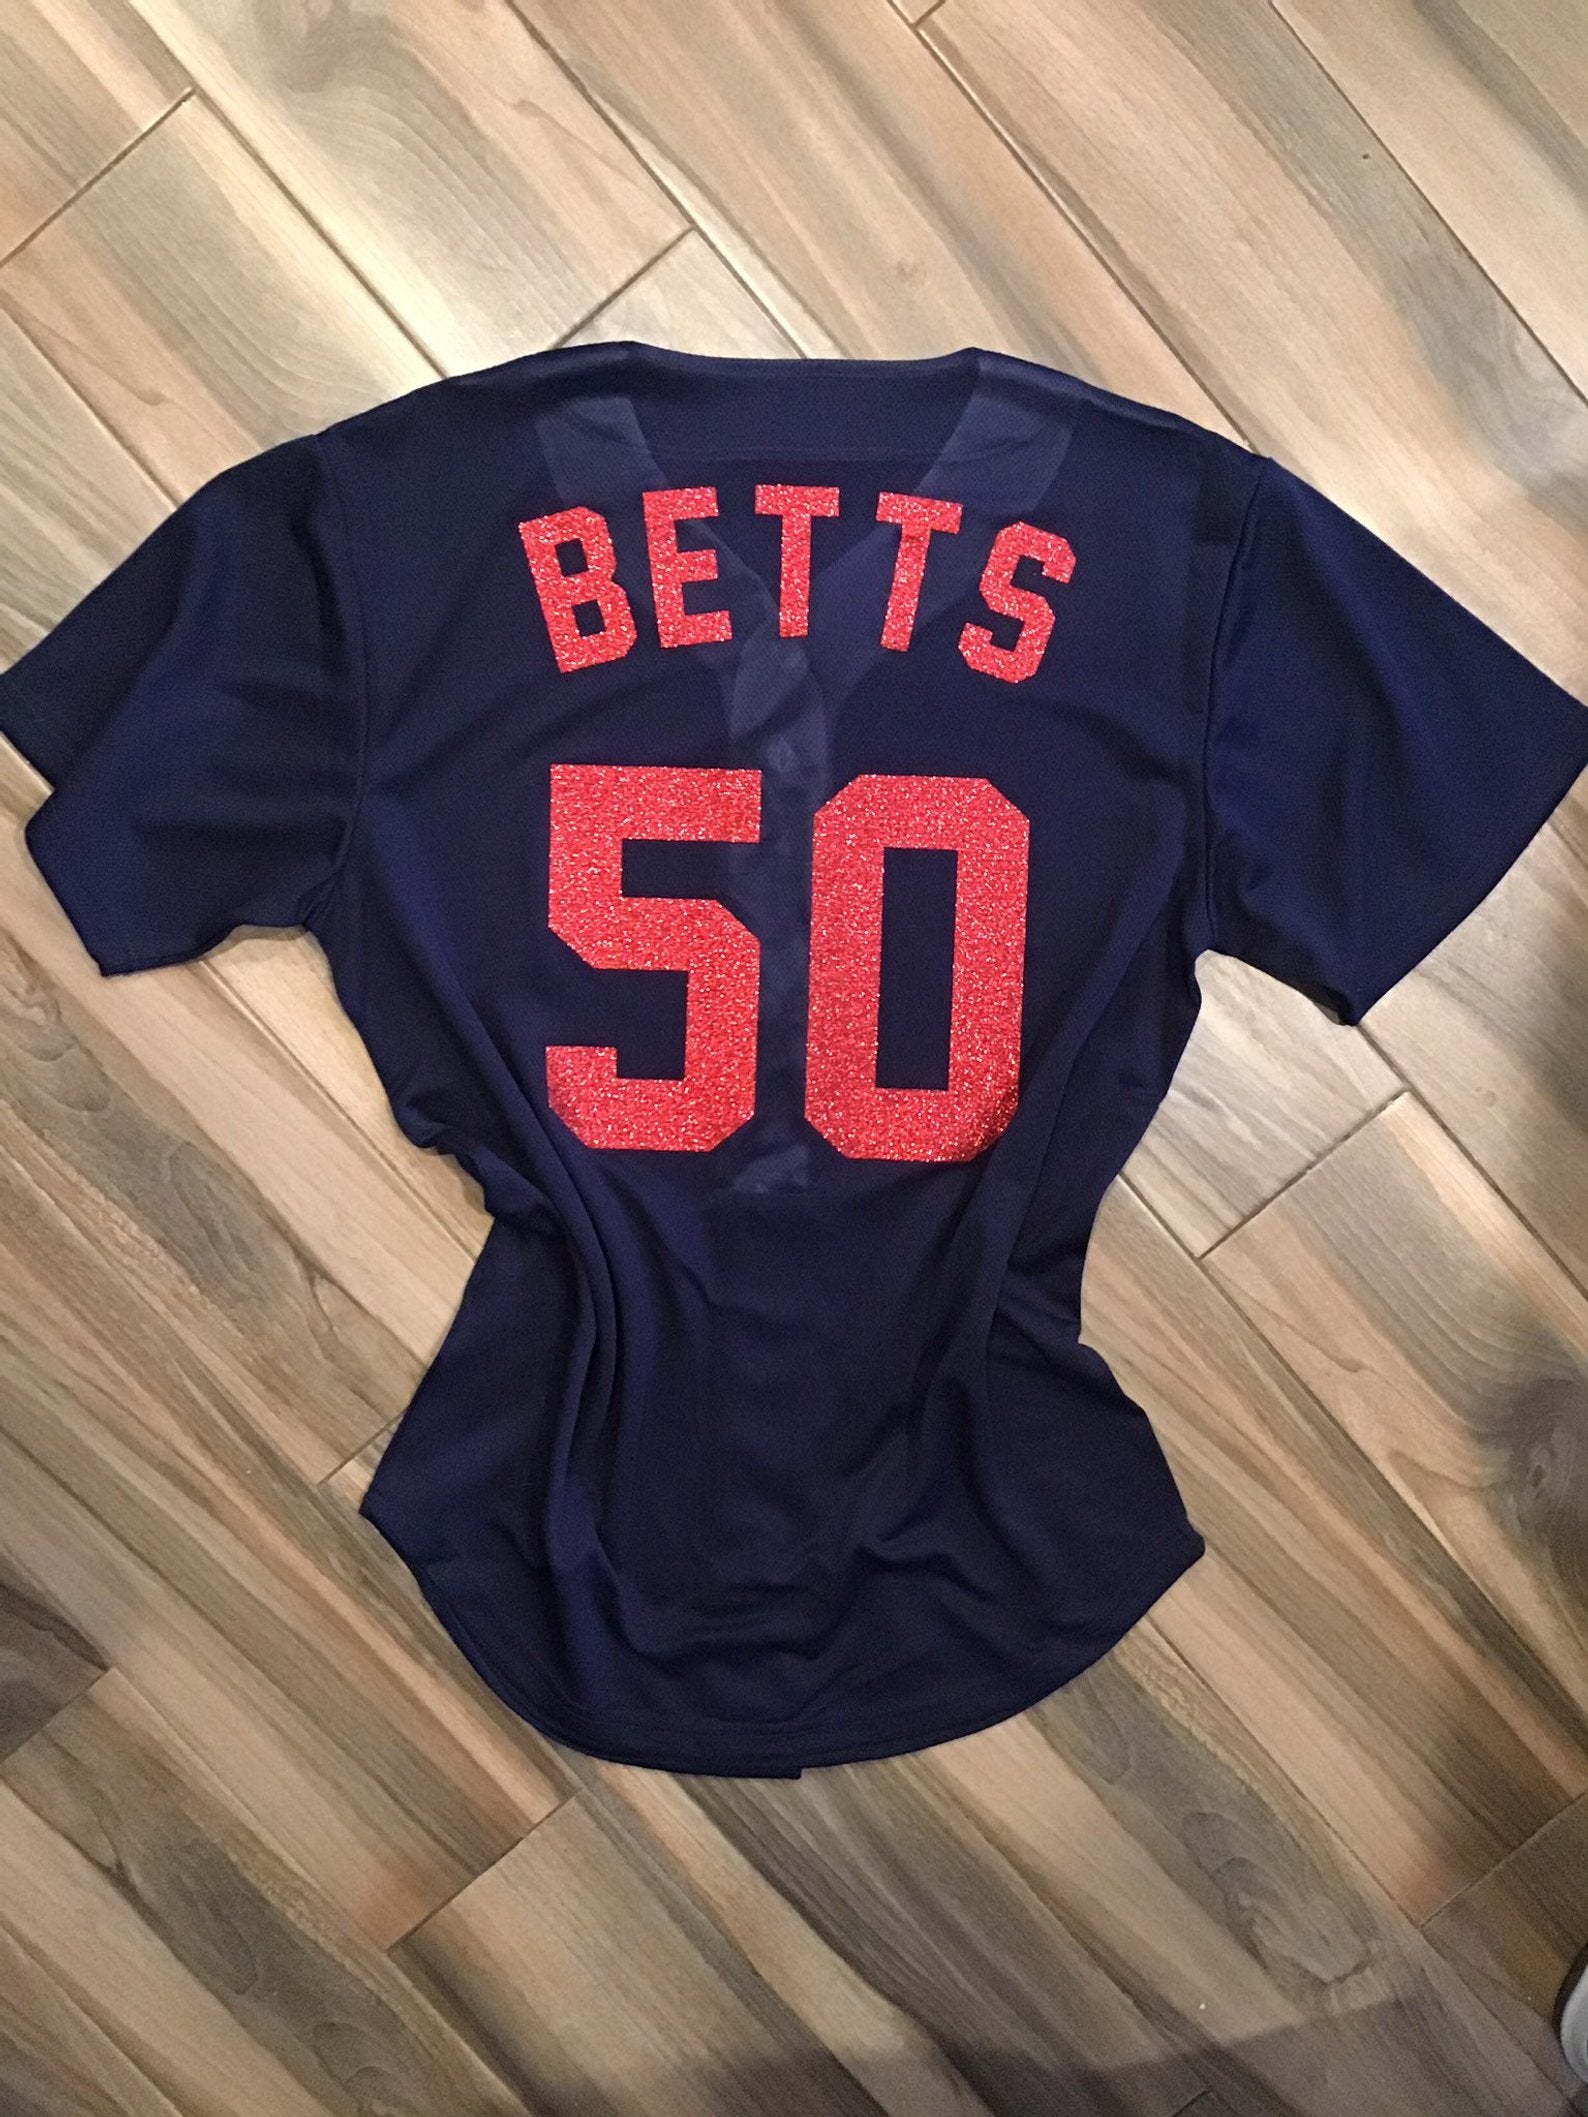 Cute dress for baseball, baseball outfit, Red Sox, girls Red Sox, custom  Red Sox, kids Red Sox, girls Red Sox shirt, Red Sox dress, custom